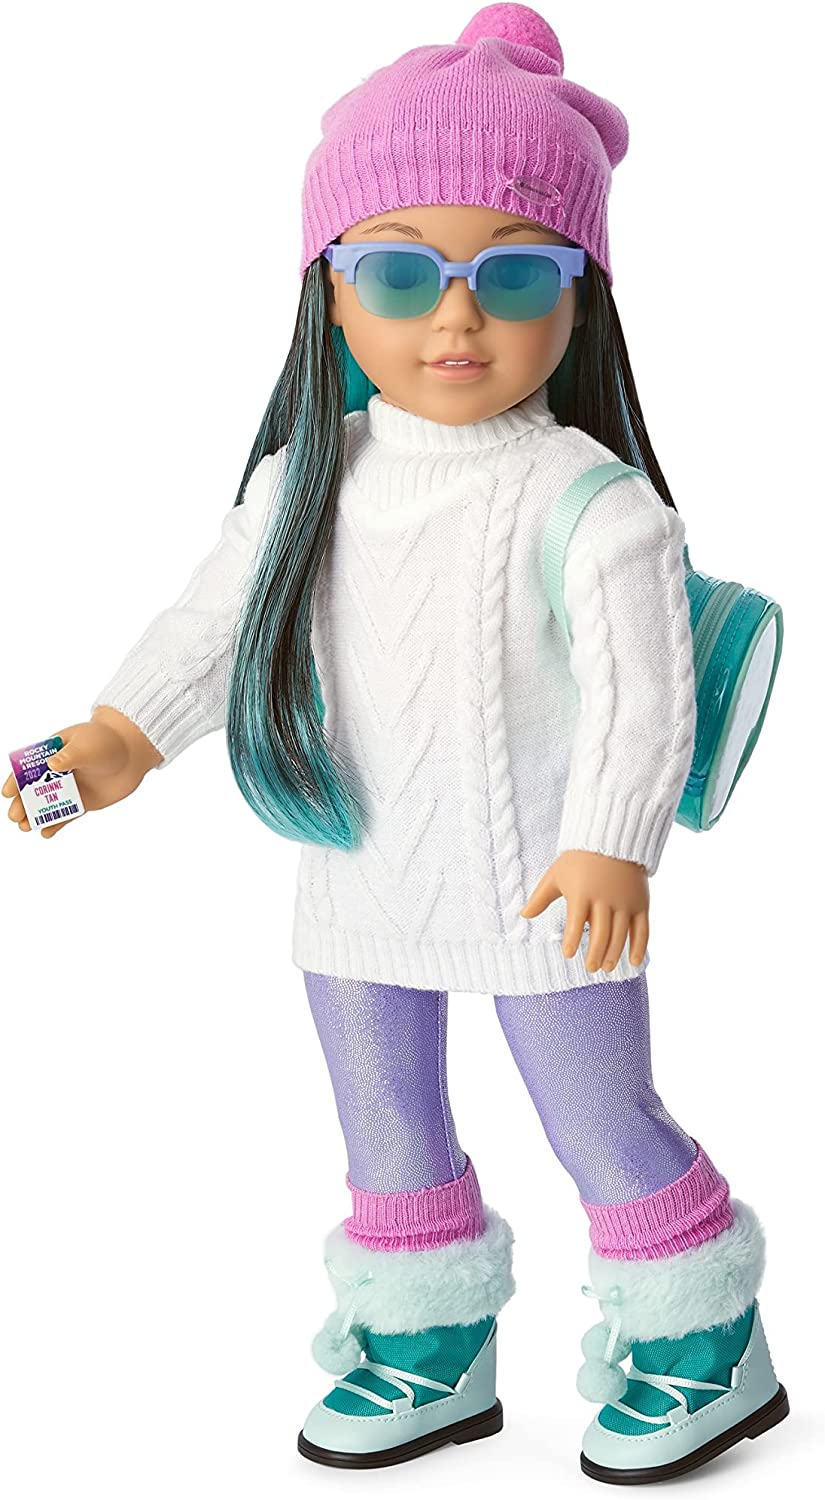 American Girl Corinne doll and her winter outfits and accessories